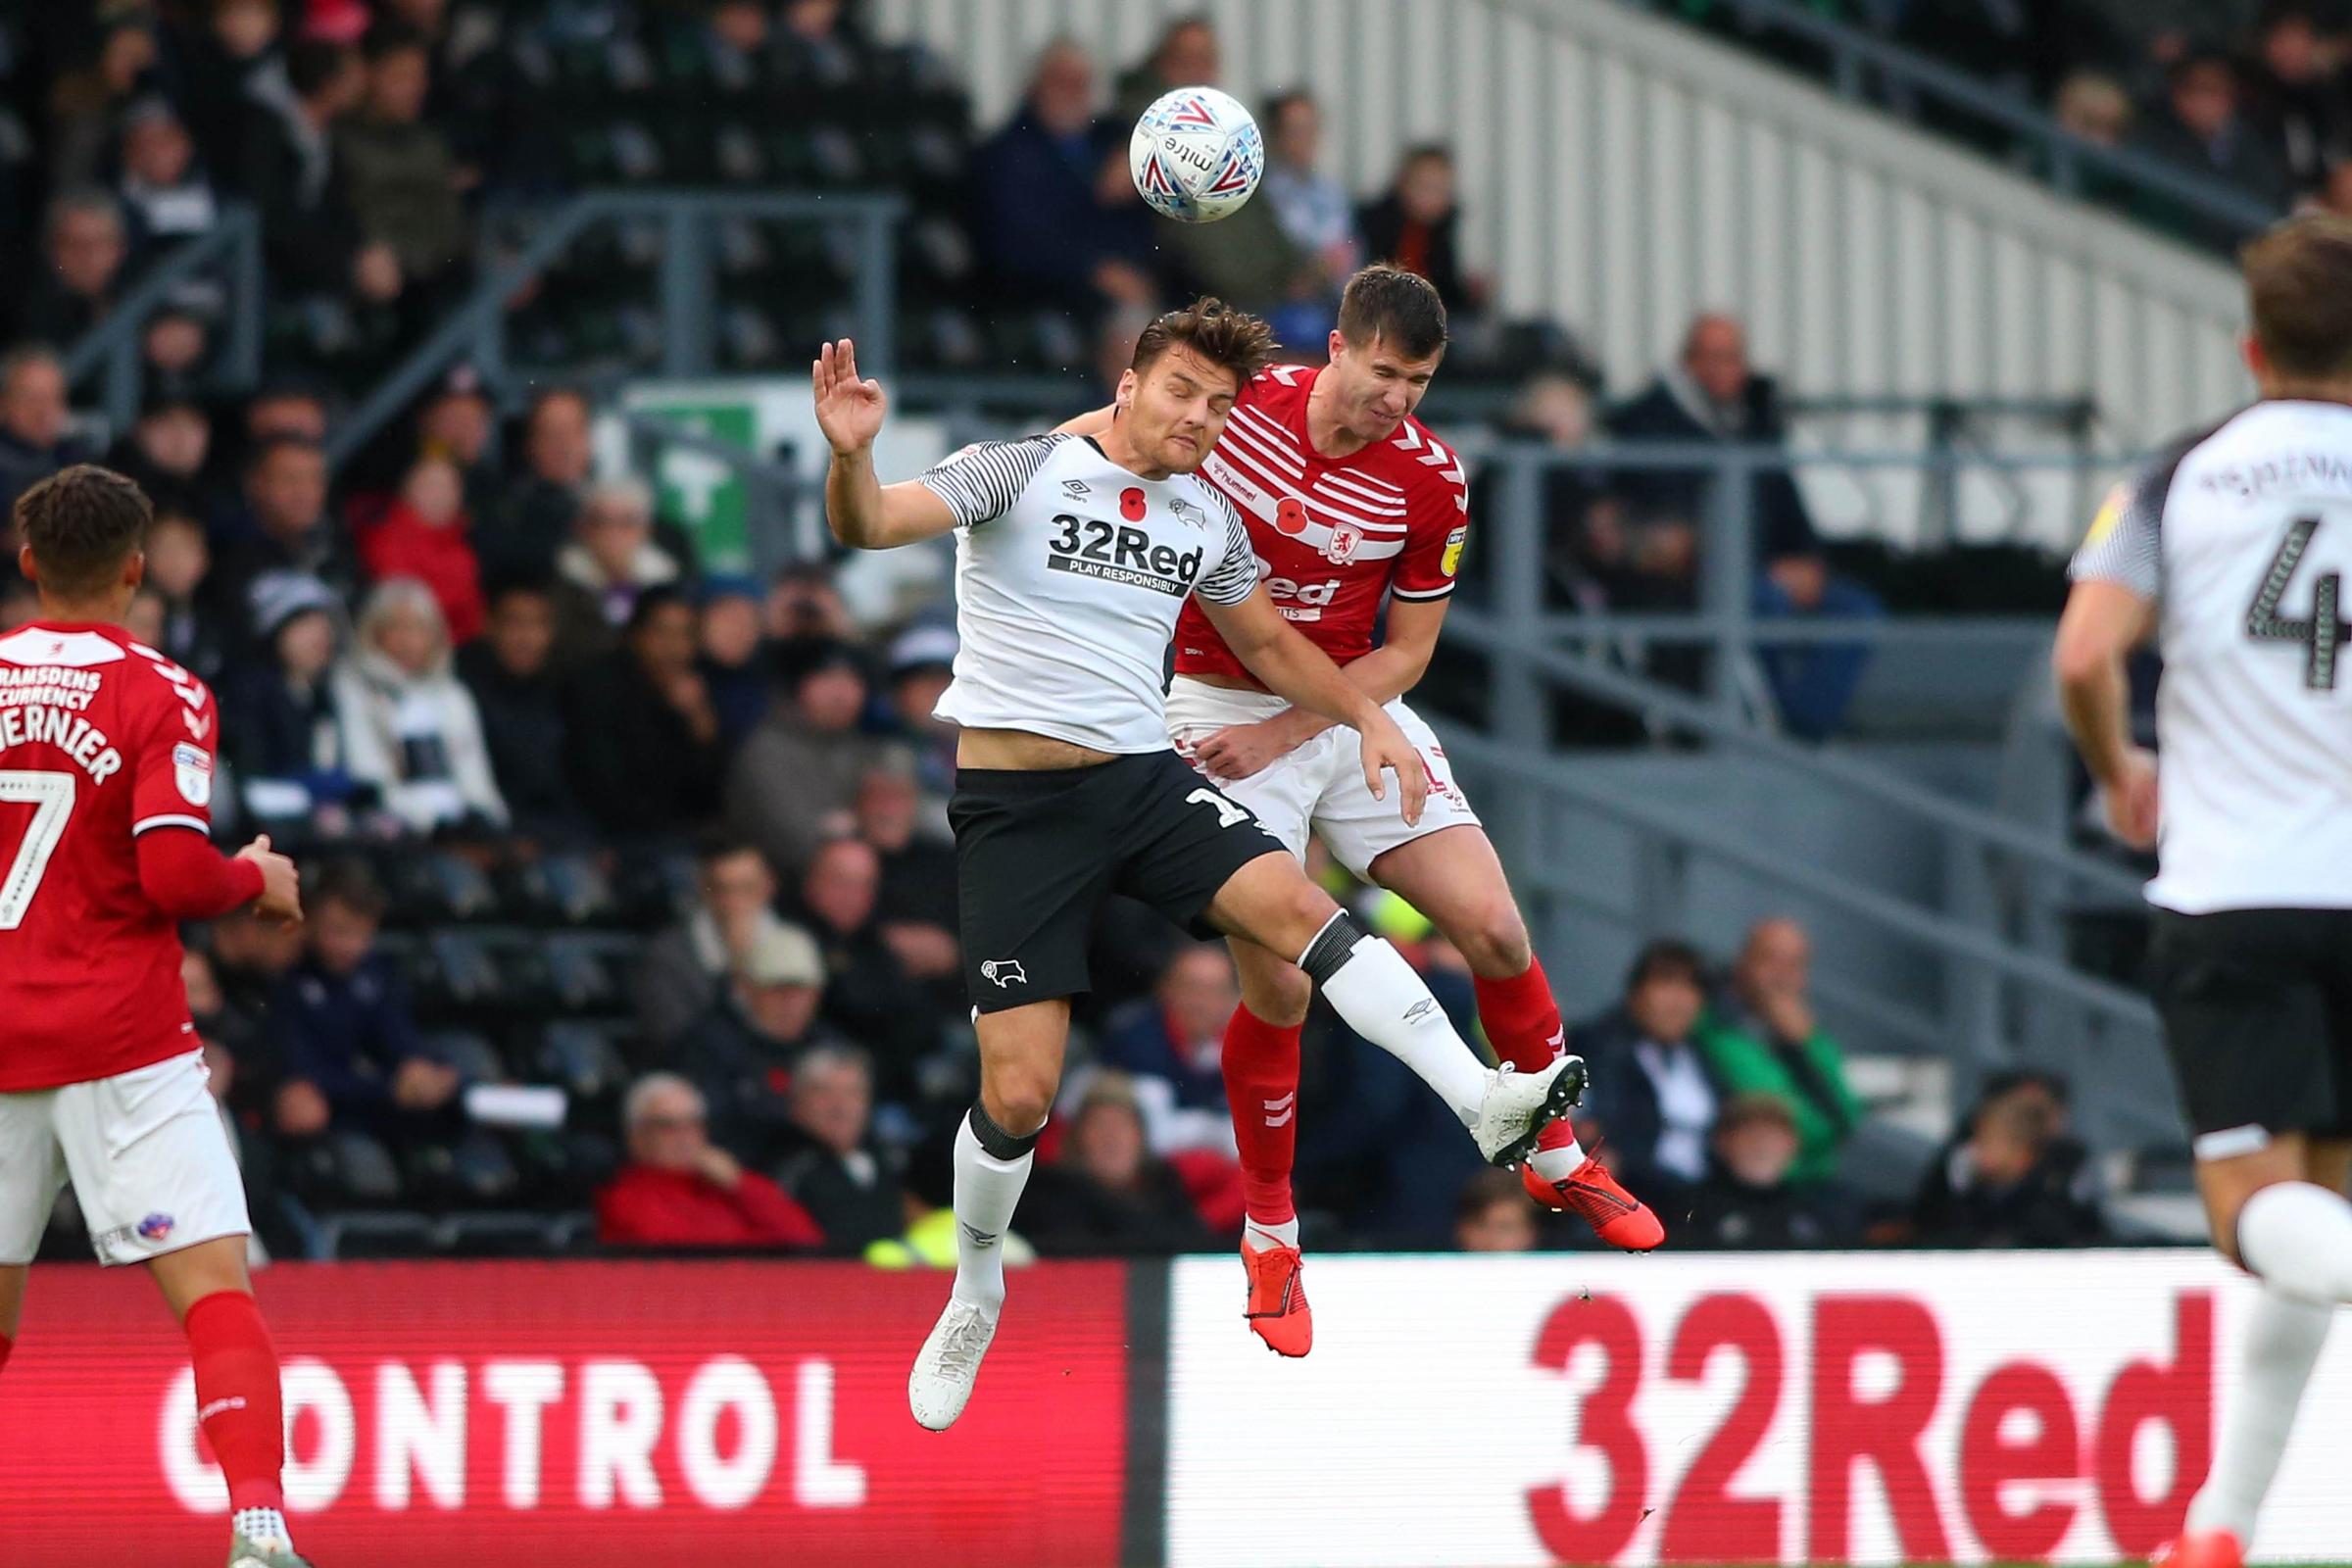 Derby County 2 Middlesbrough 0: Assombalonga miss sets tone